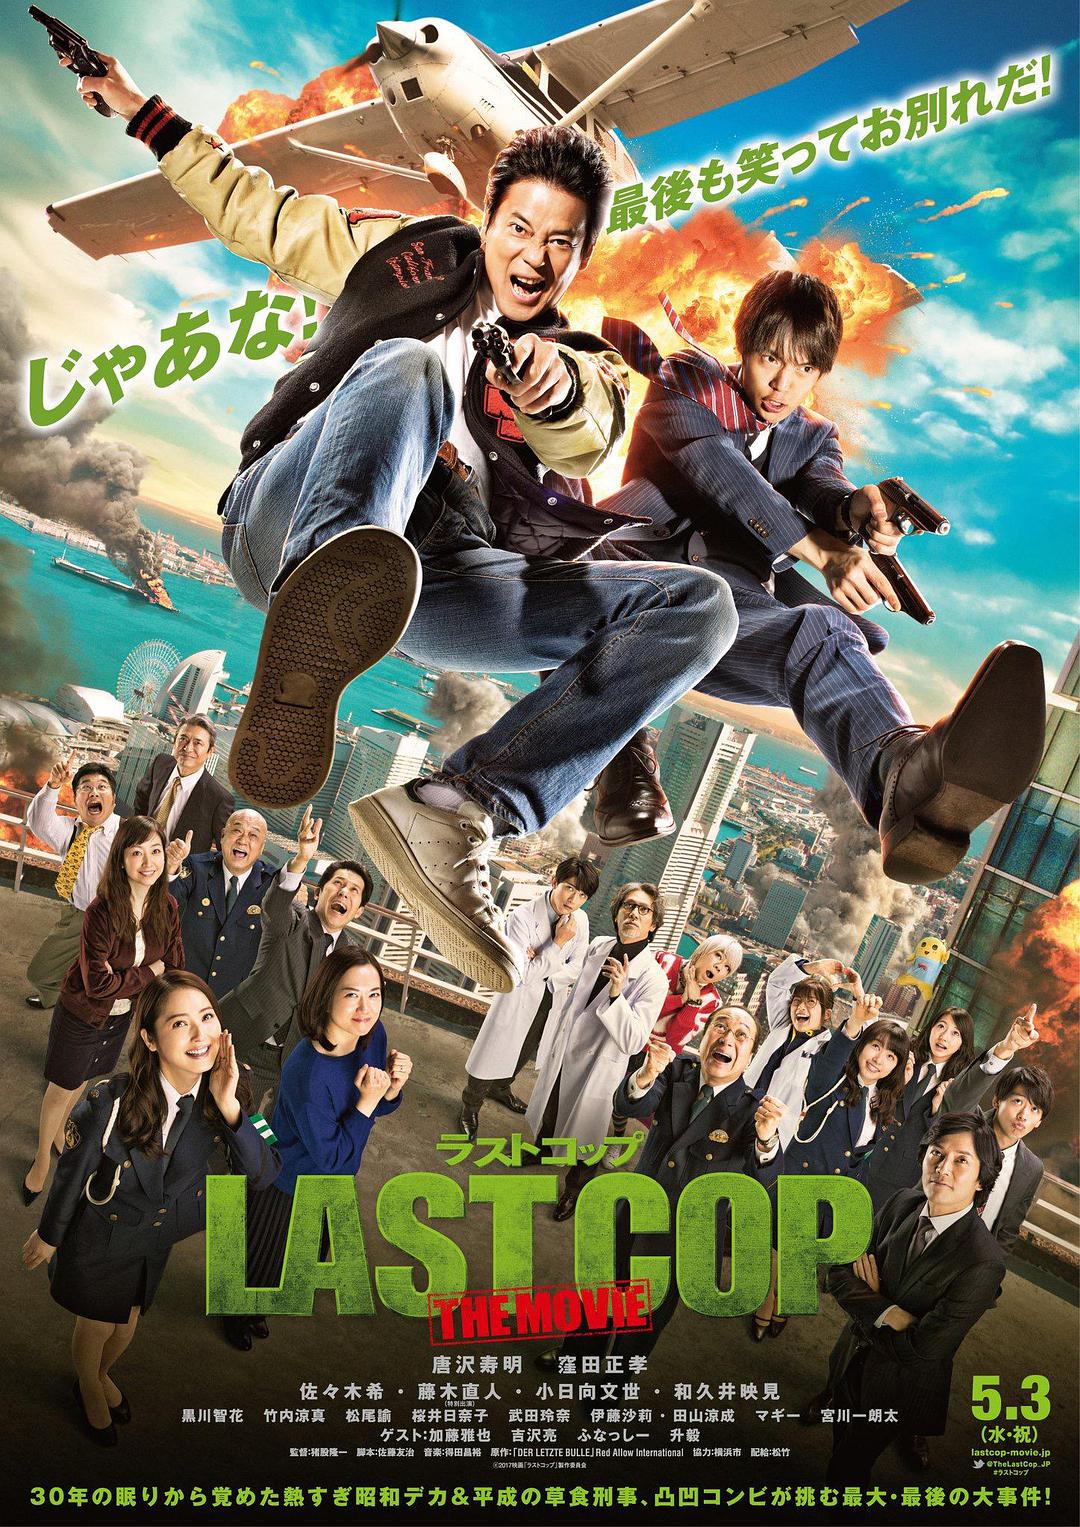 ľ Ӱ Last.Cop.The.Movie.2017.JAPANESE.1080p.BluRay.x264.DTS-WiKi 9.75GB-1.png